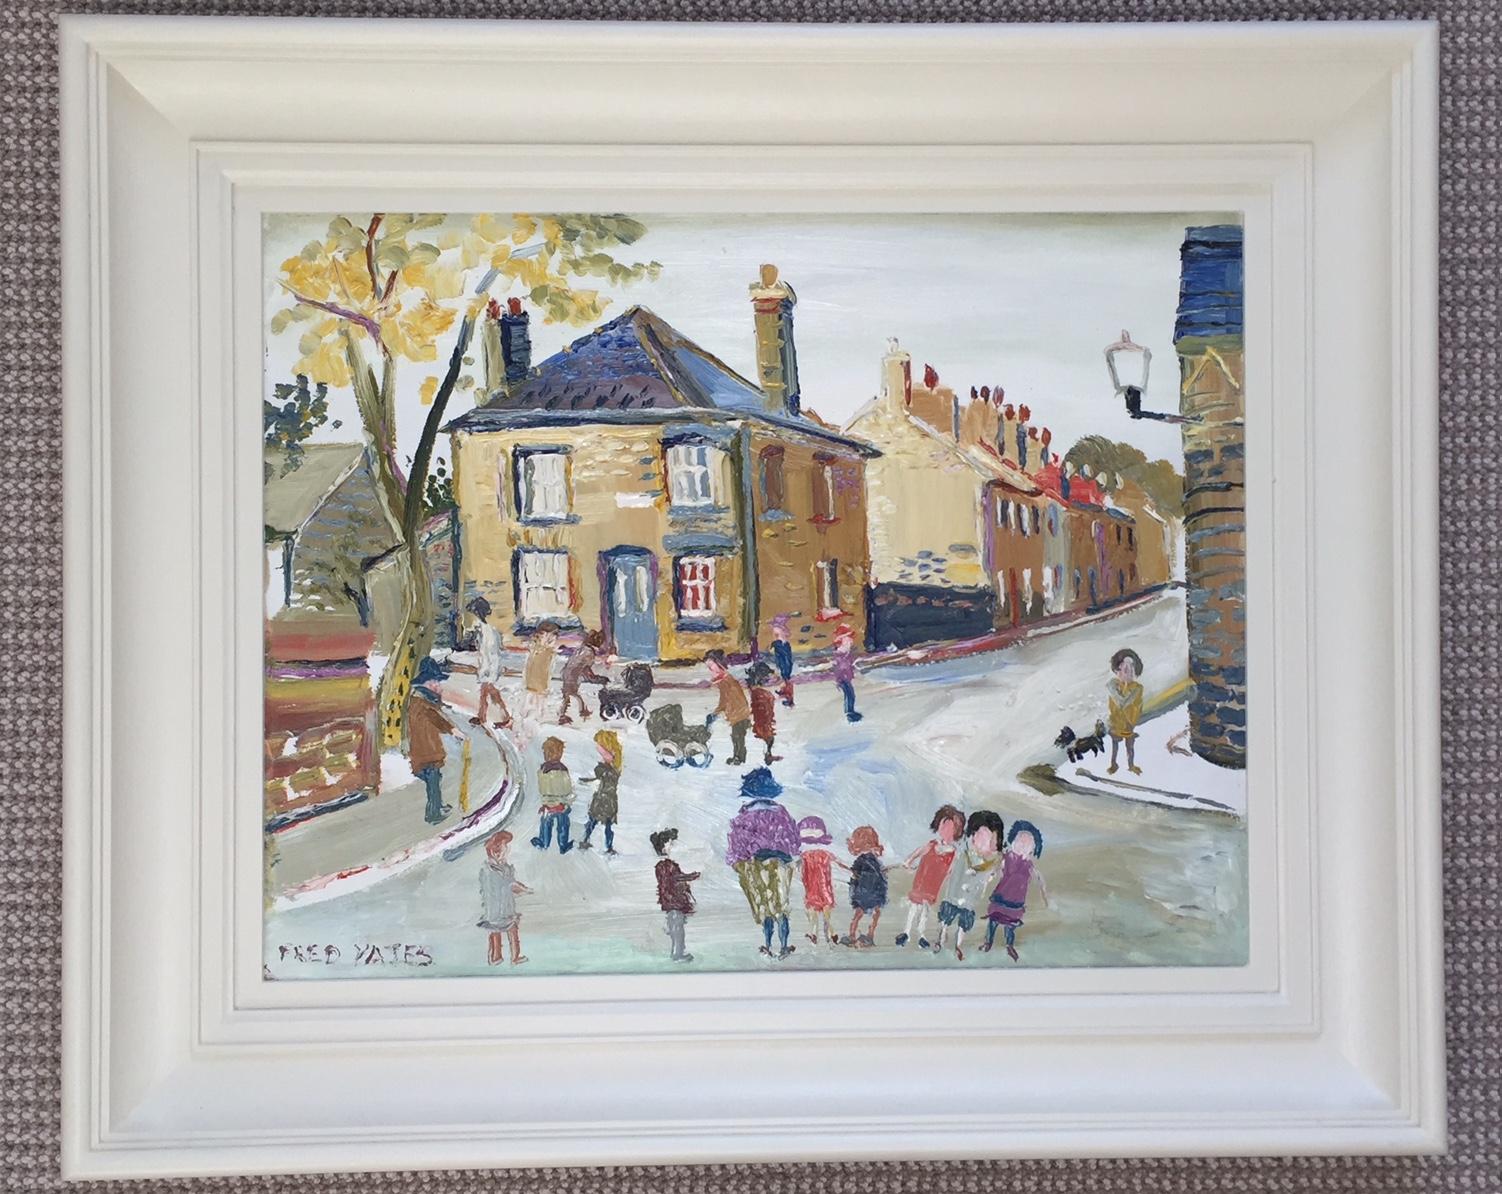 fred yates paintings for sale